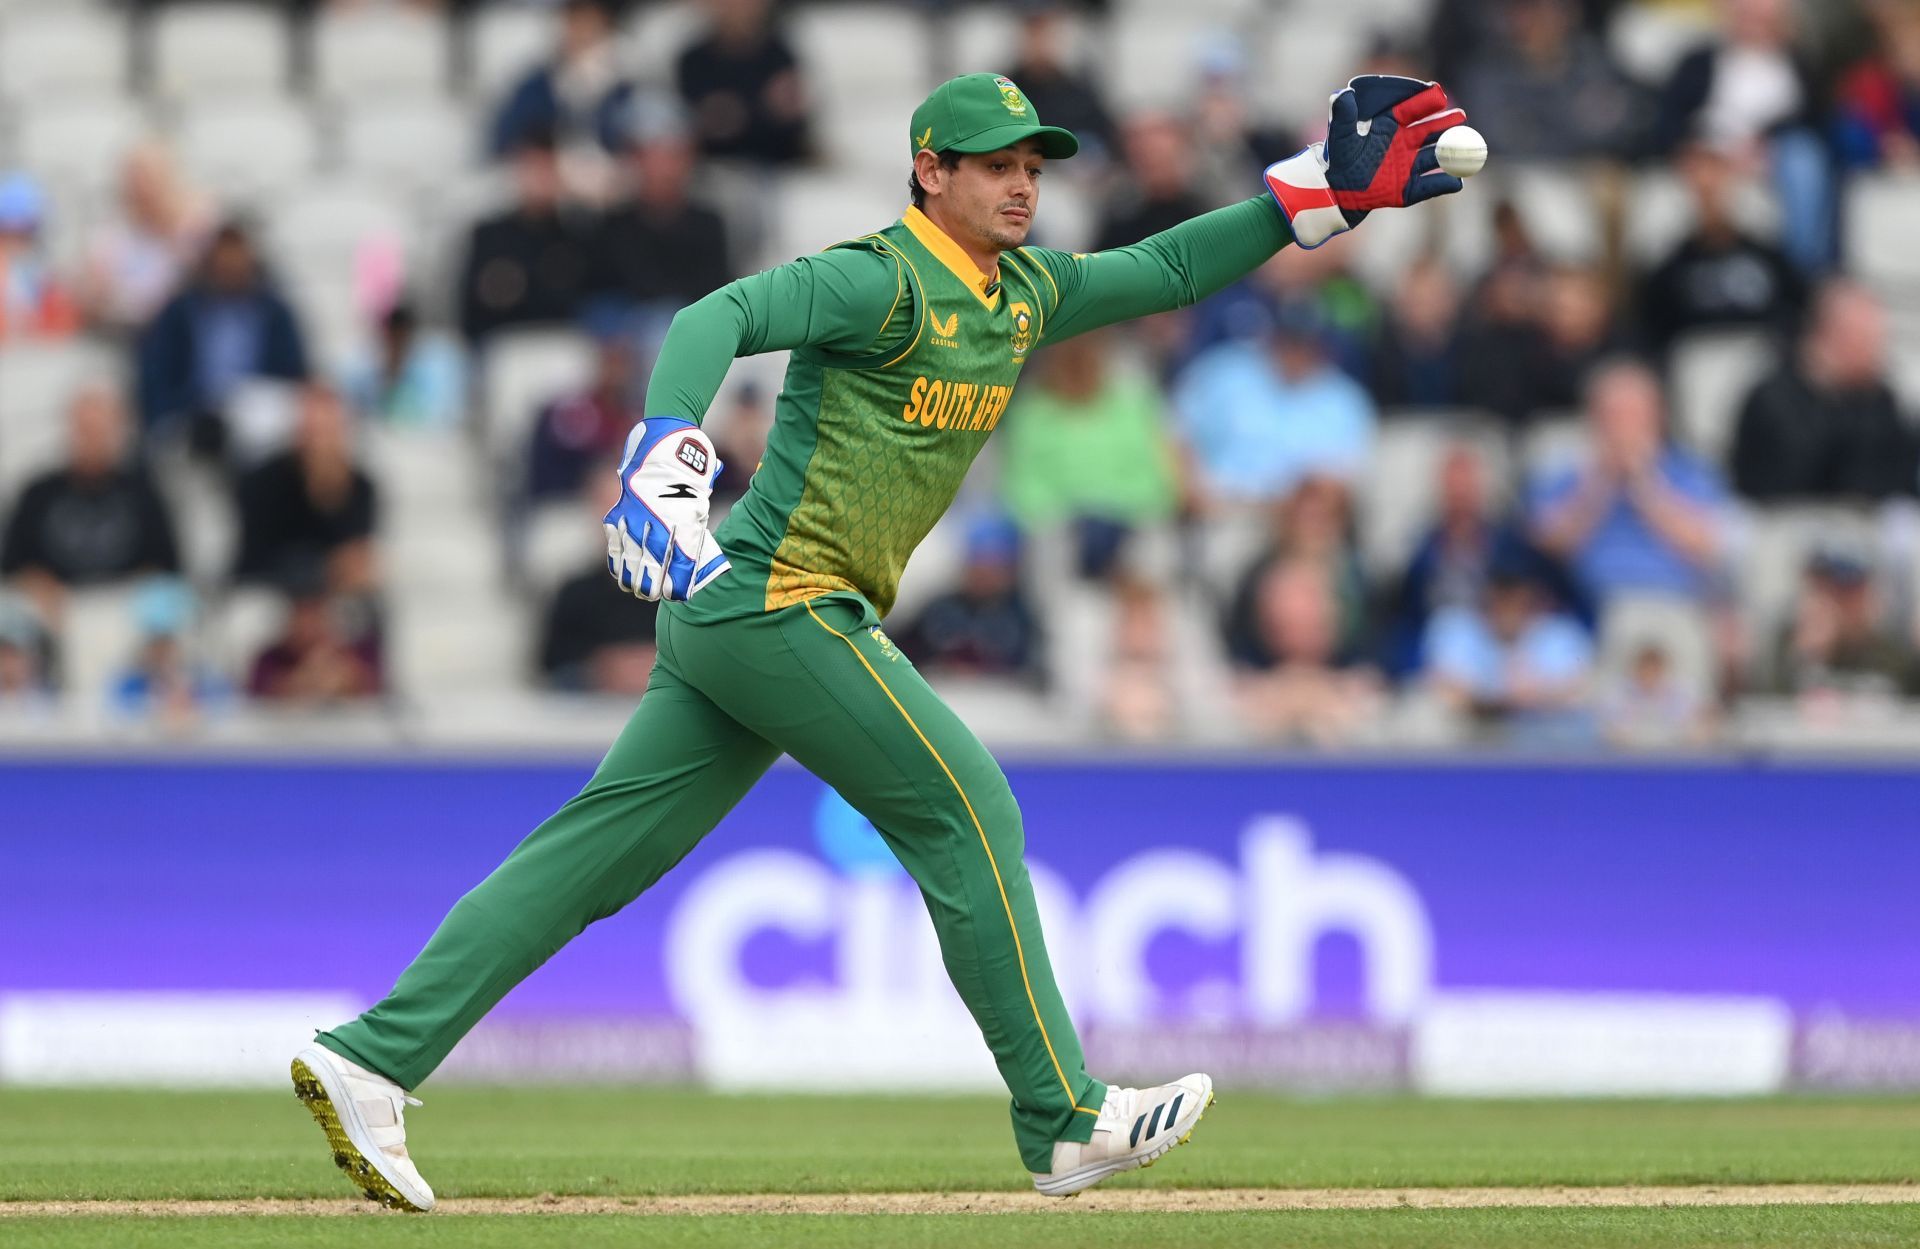 Quinton de Kock has retired from Tests. (Credits: Getty)